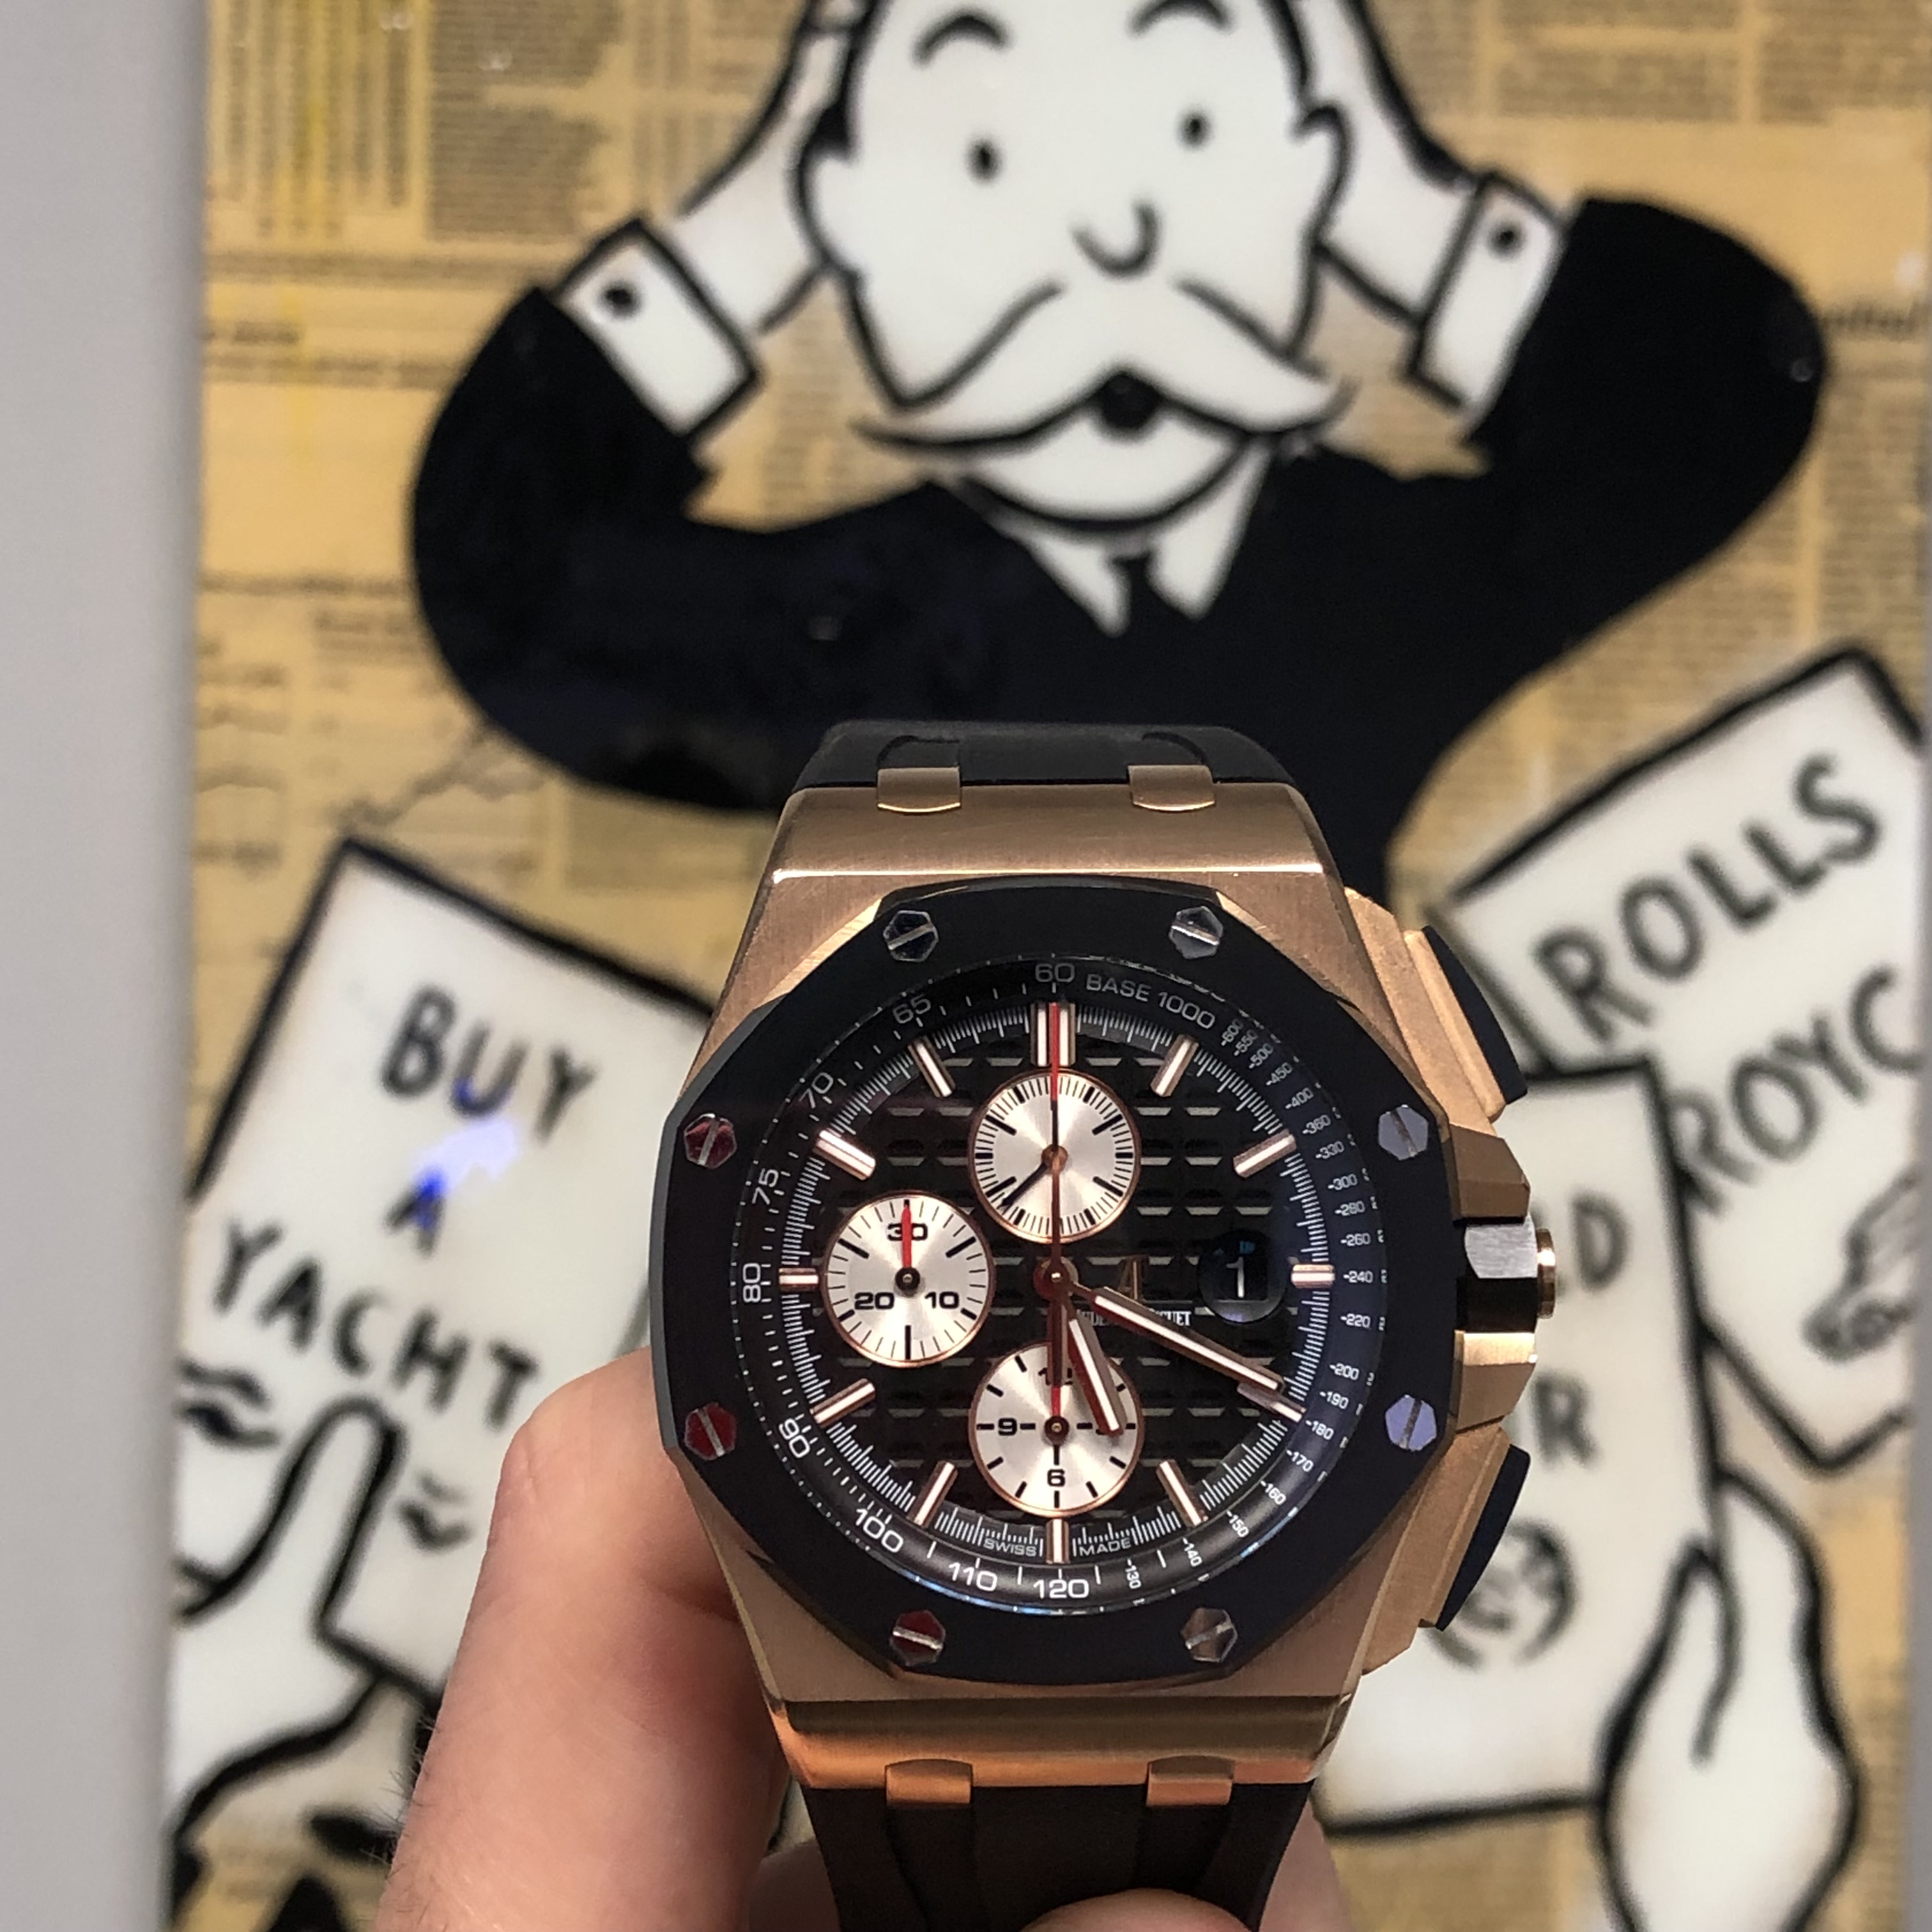 audemars piguet royal oak offshore rose gold rubber clad watch with Monopoly man in the background